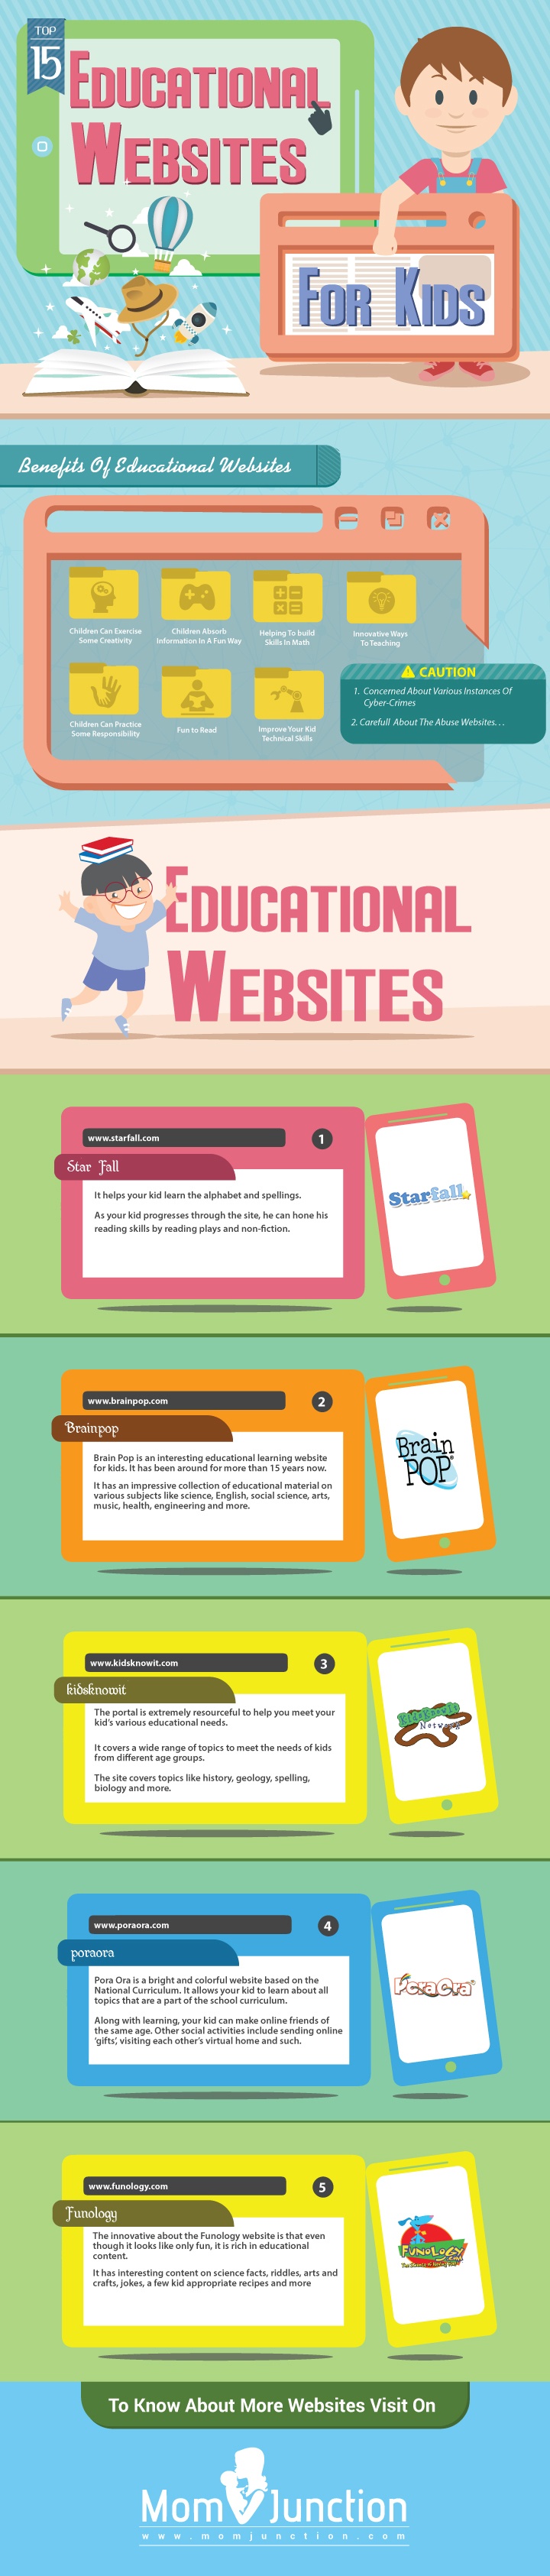 Top 5 Educational Websites For Kids Infographic